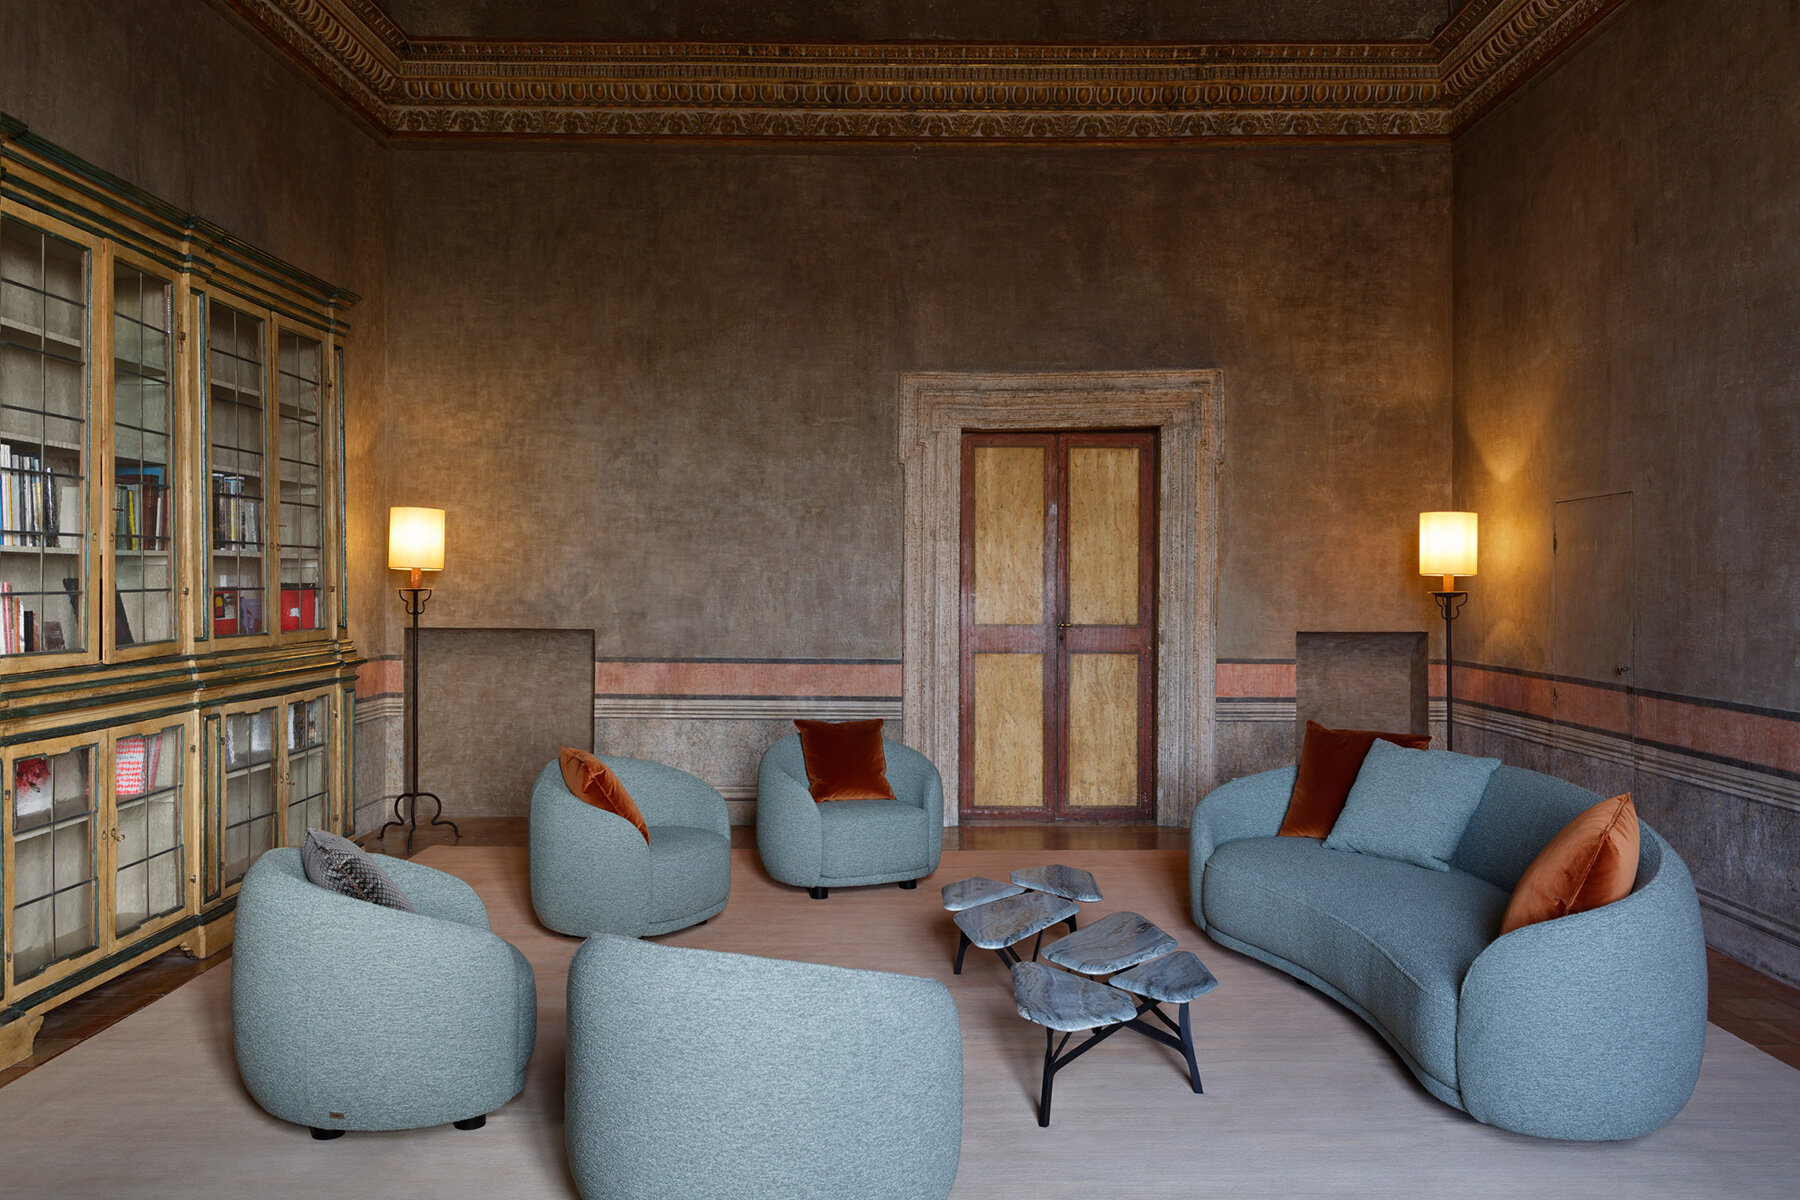 Fendi unveils new Palazzo in the heart of Rome - LVMH